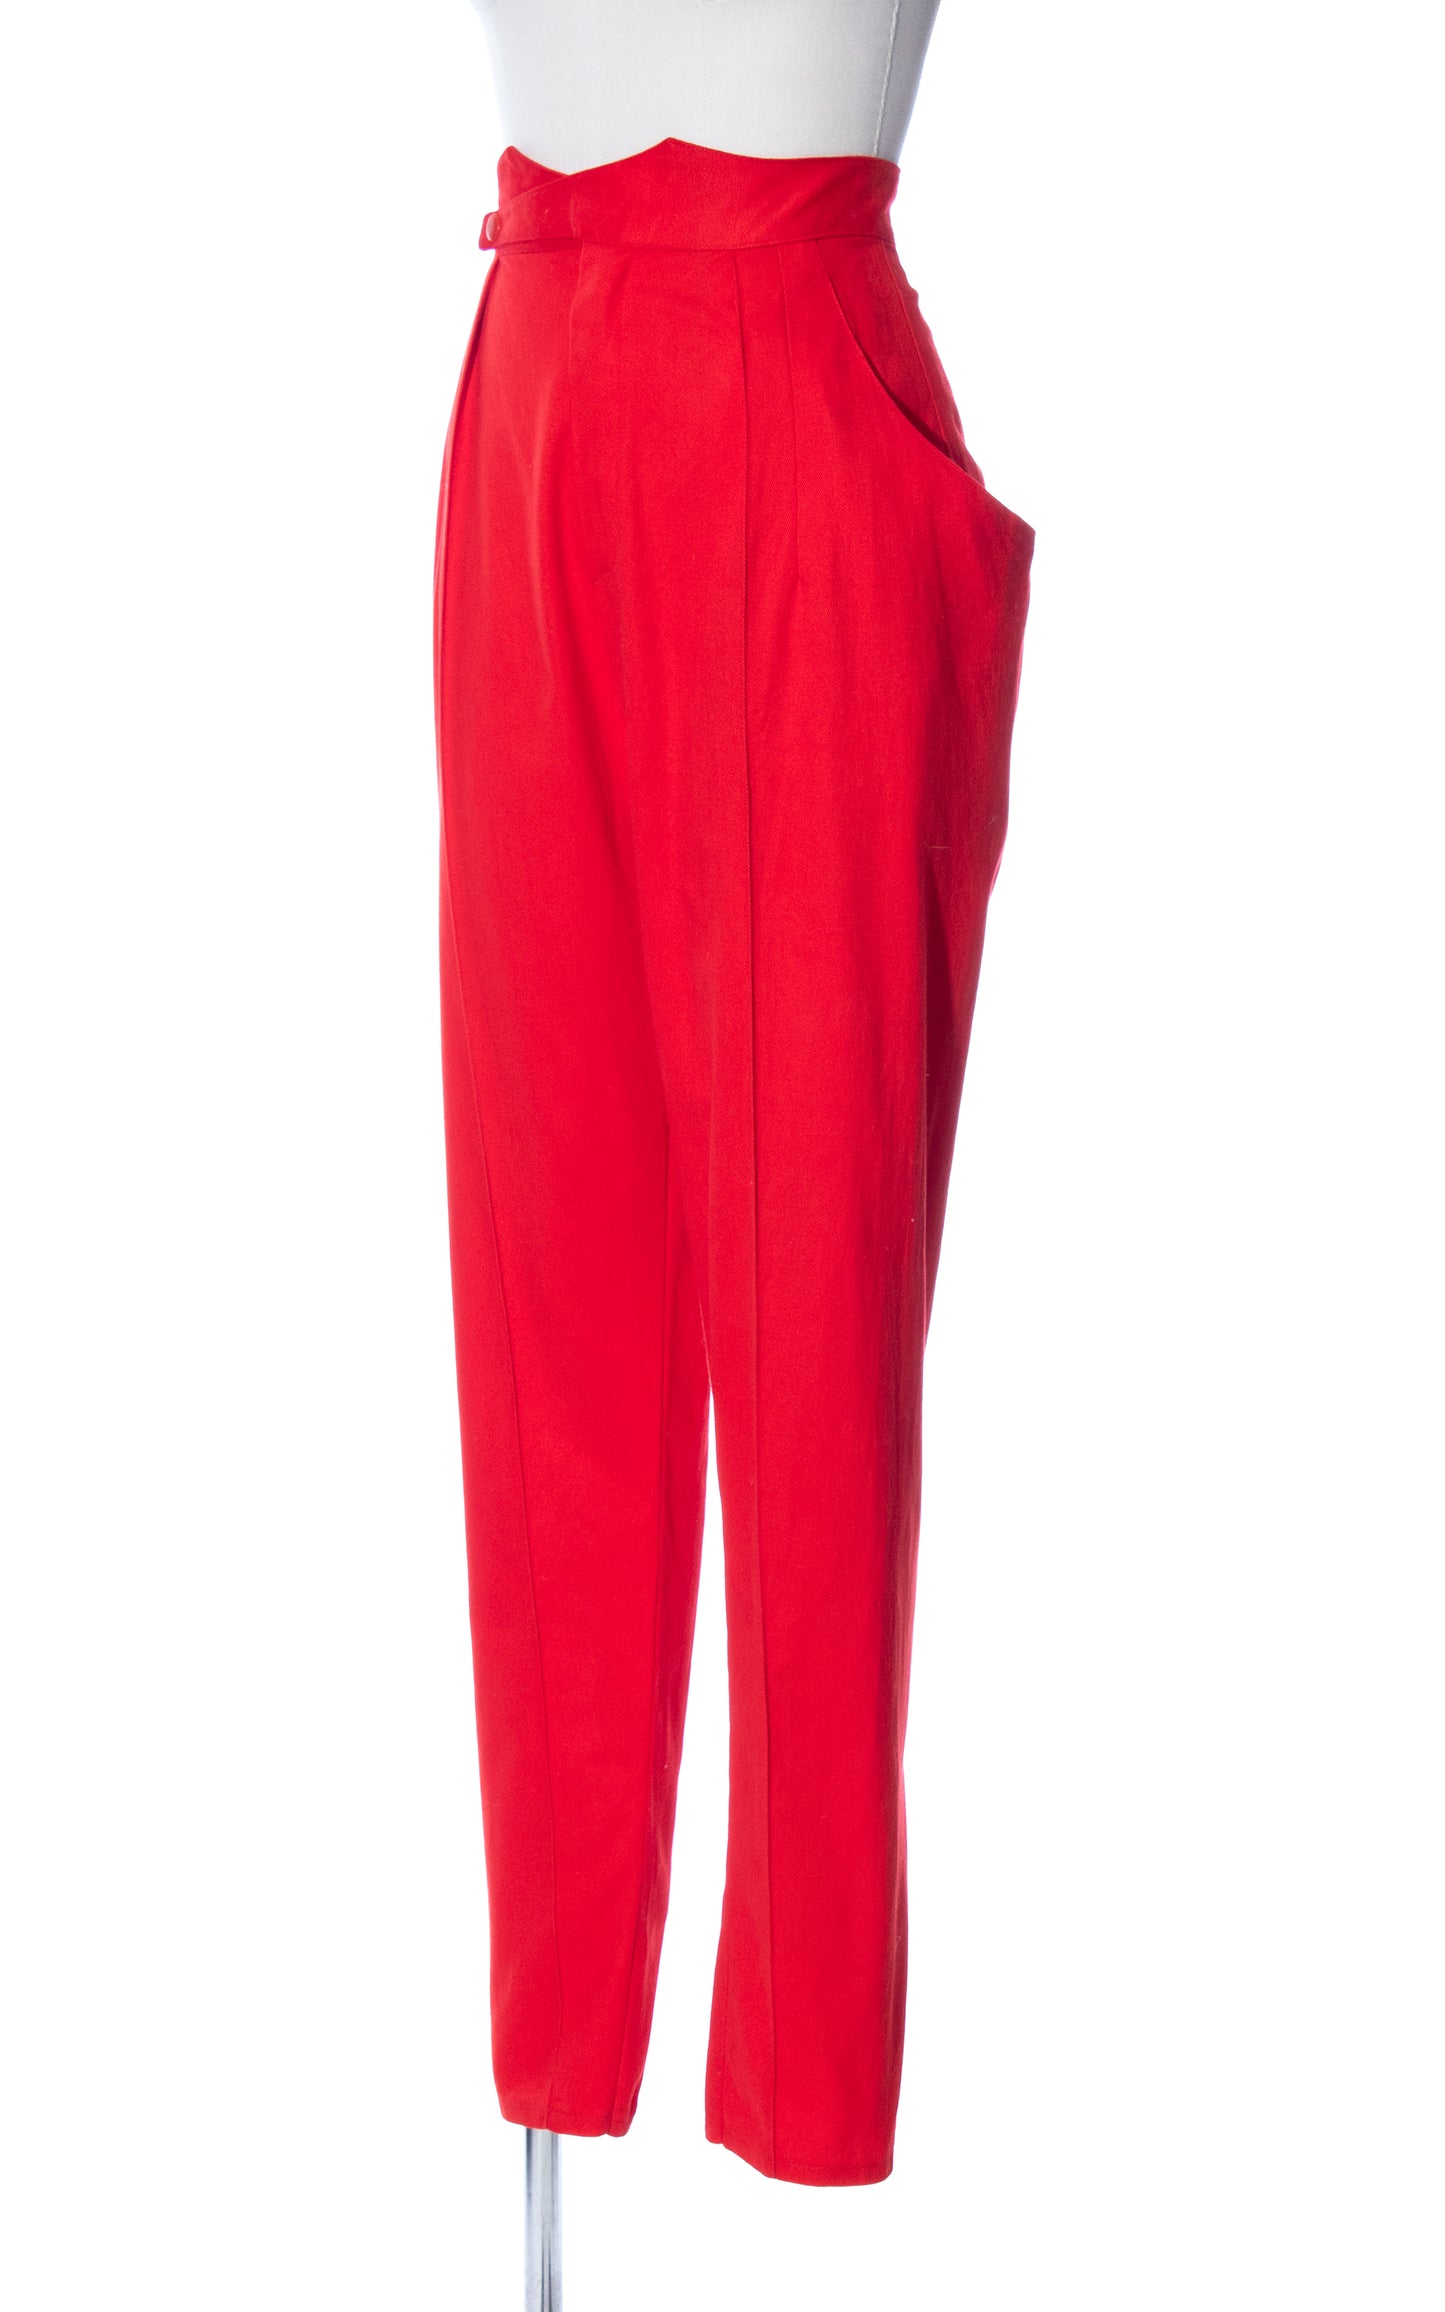 Vintage 80s 1980s Red Cotton Twill Extra High Waisted Pants Birthday Life Vintage